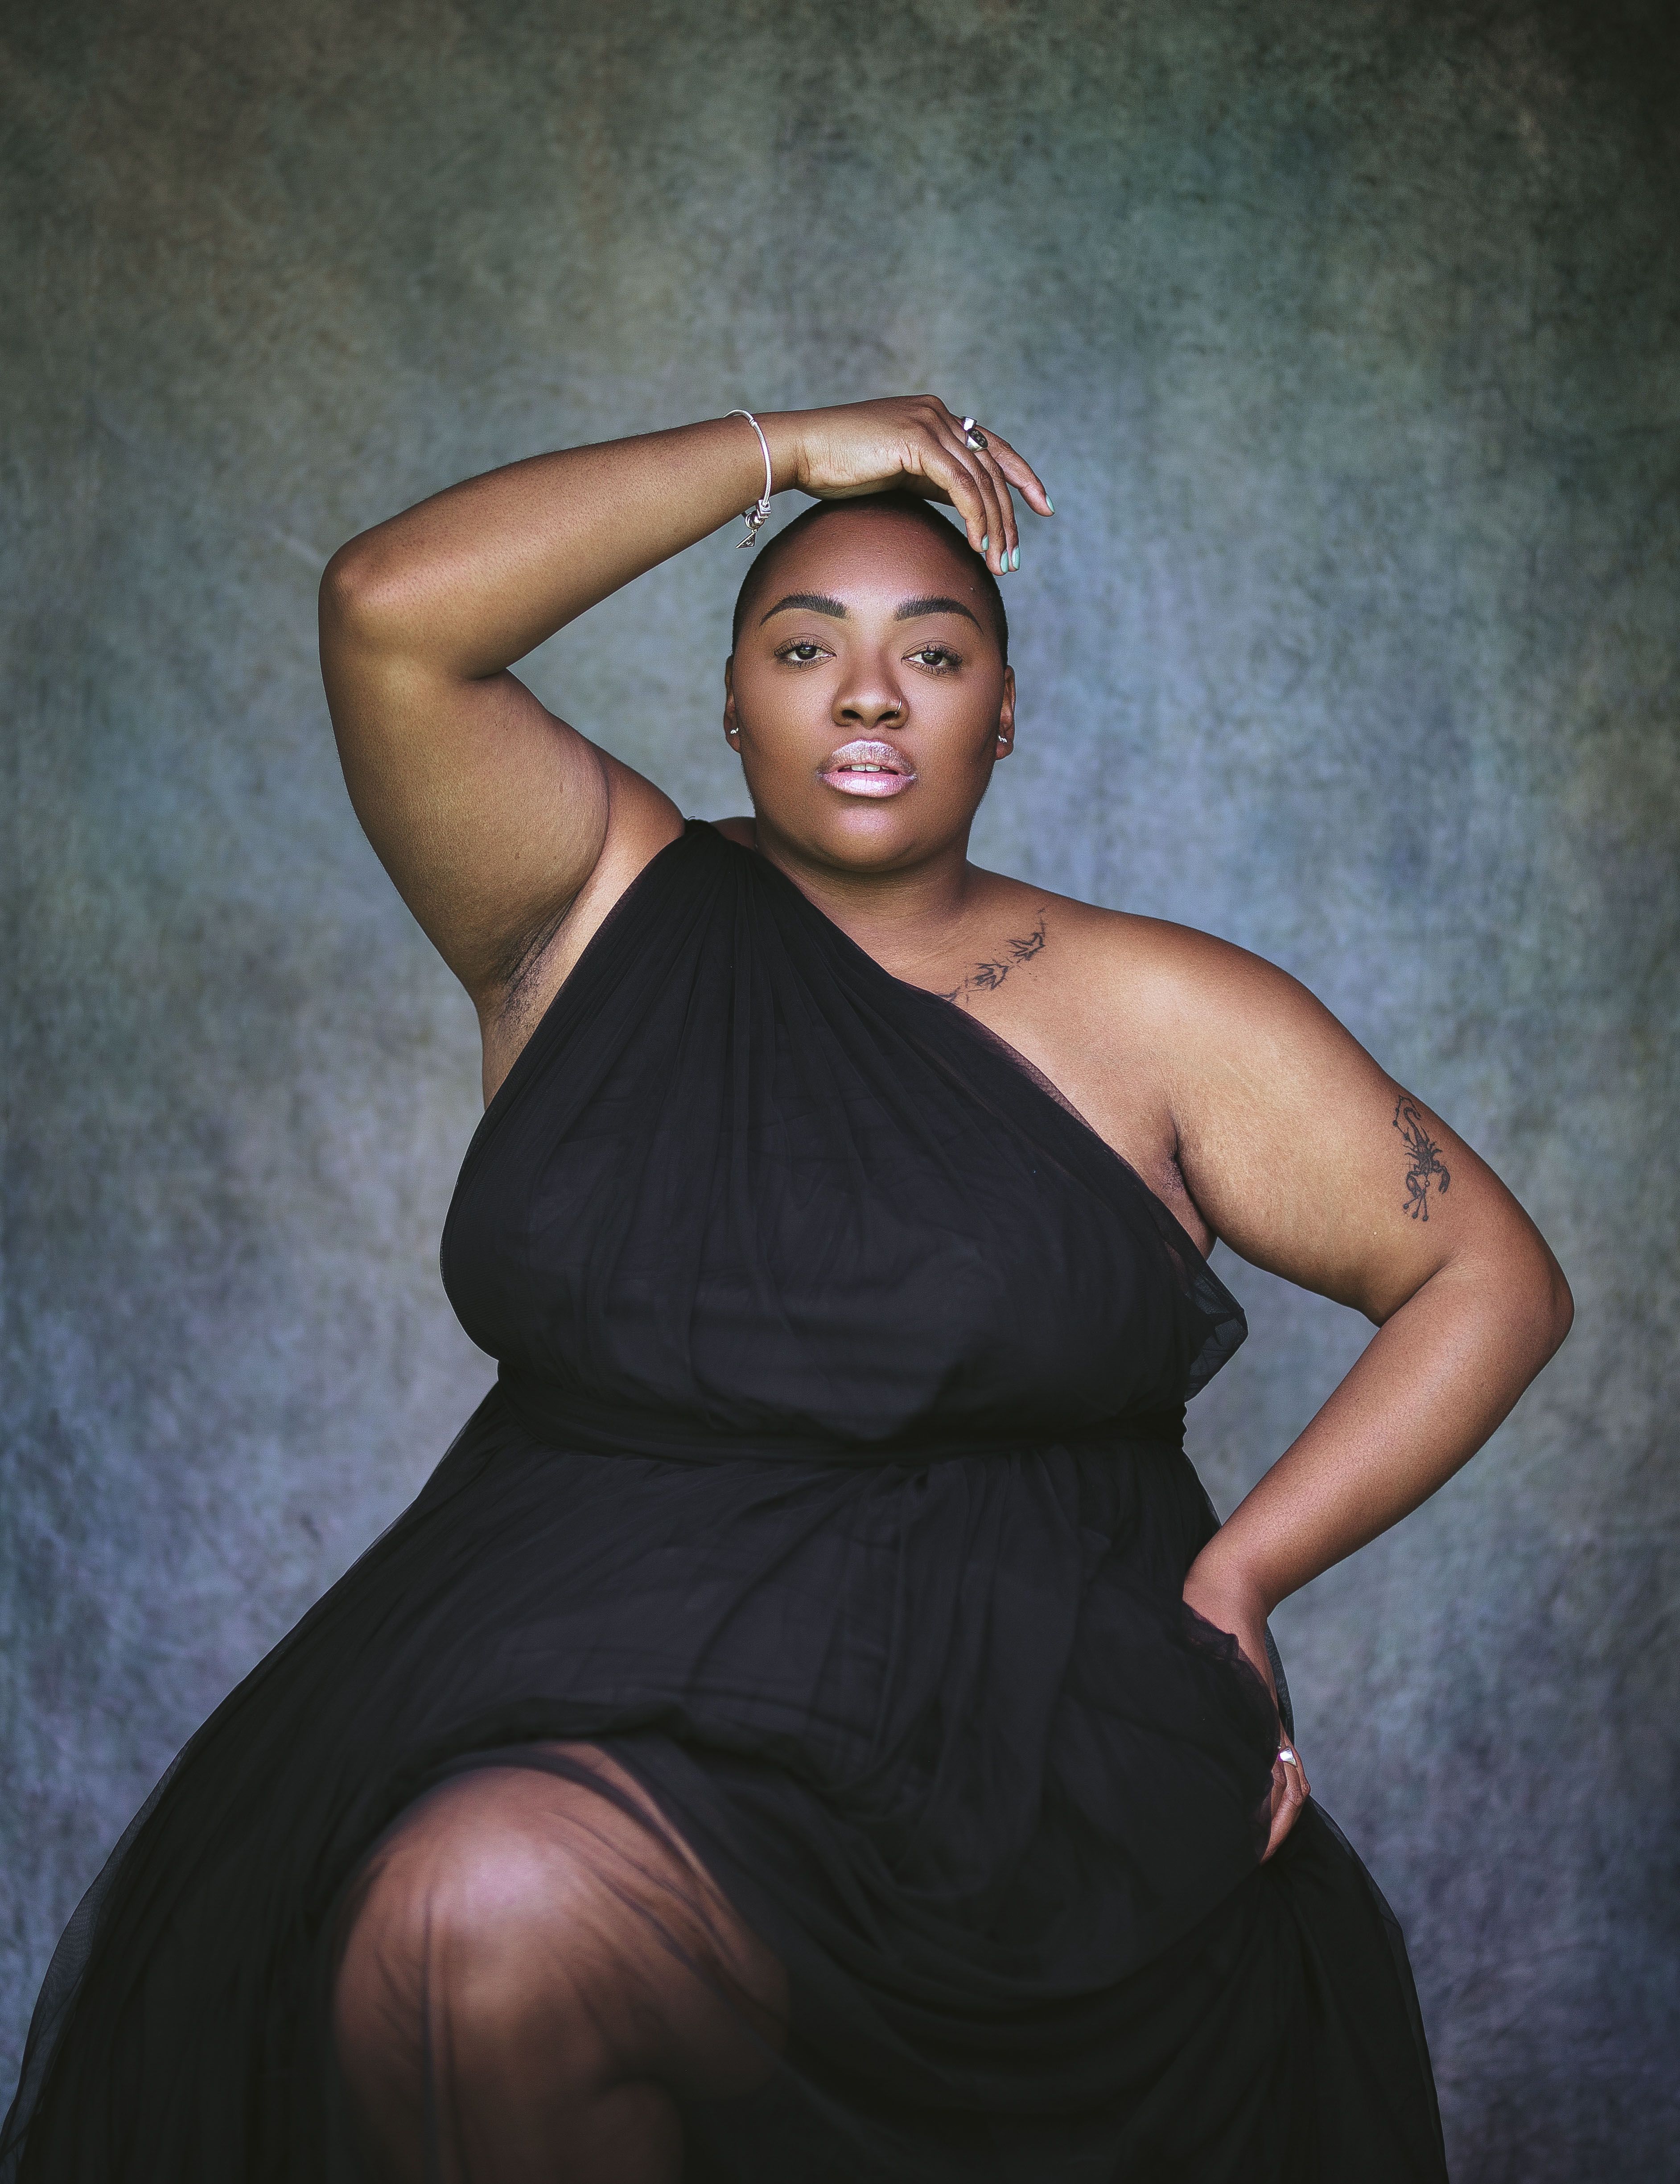 Plus Size Modeling Opportunities